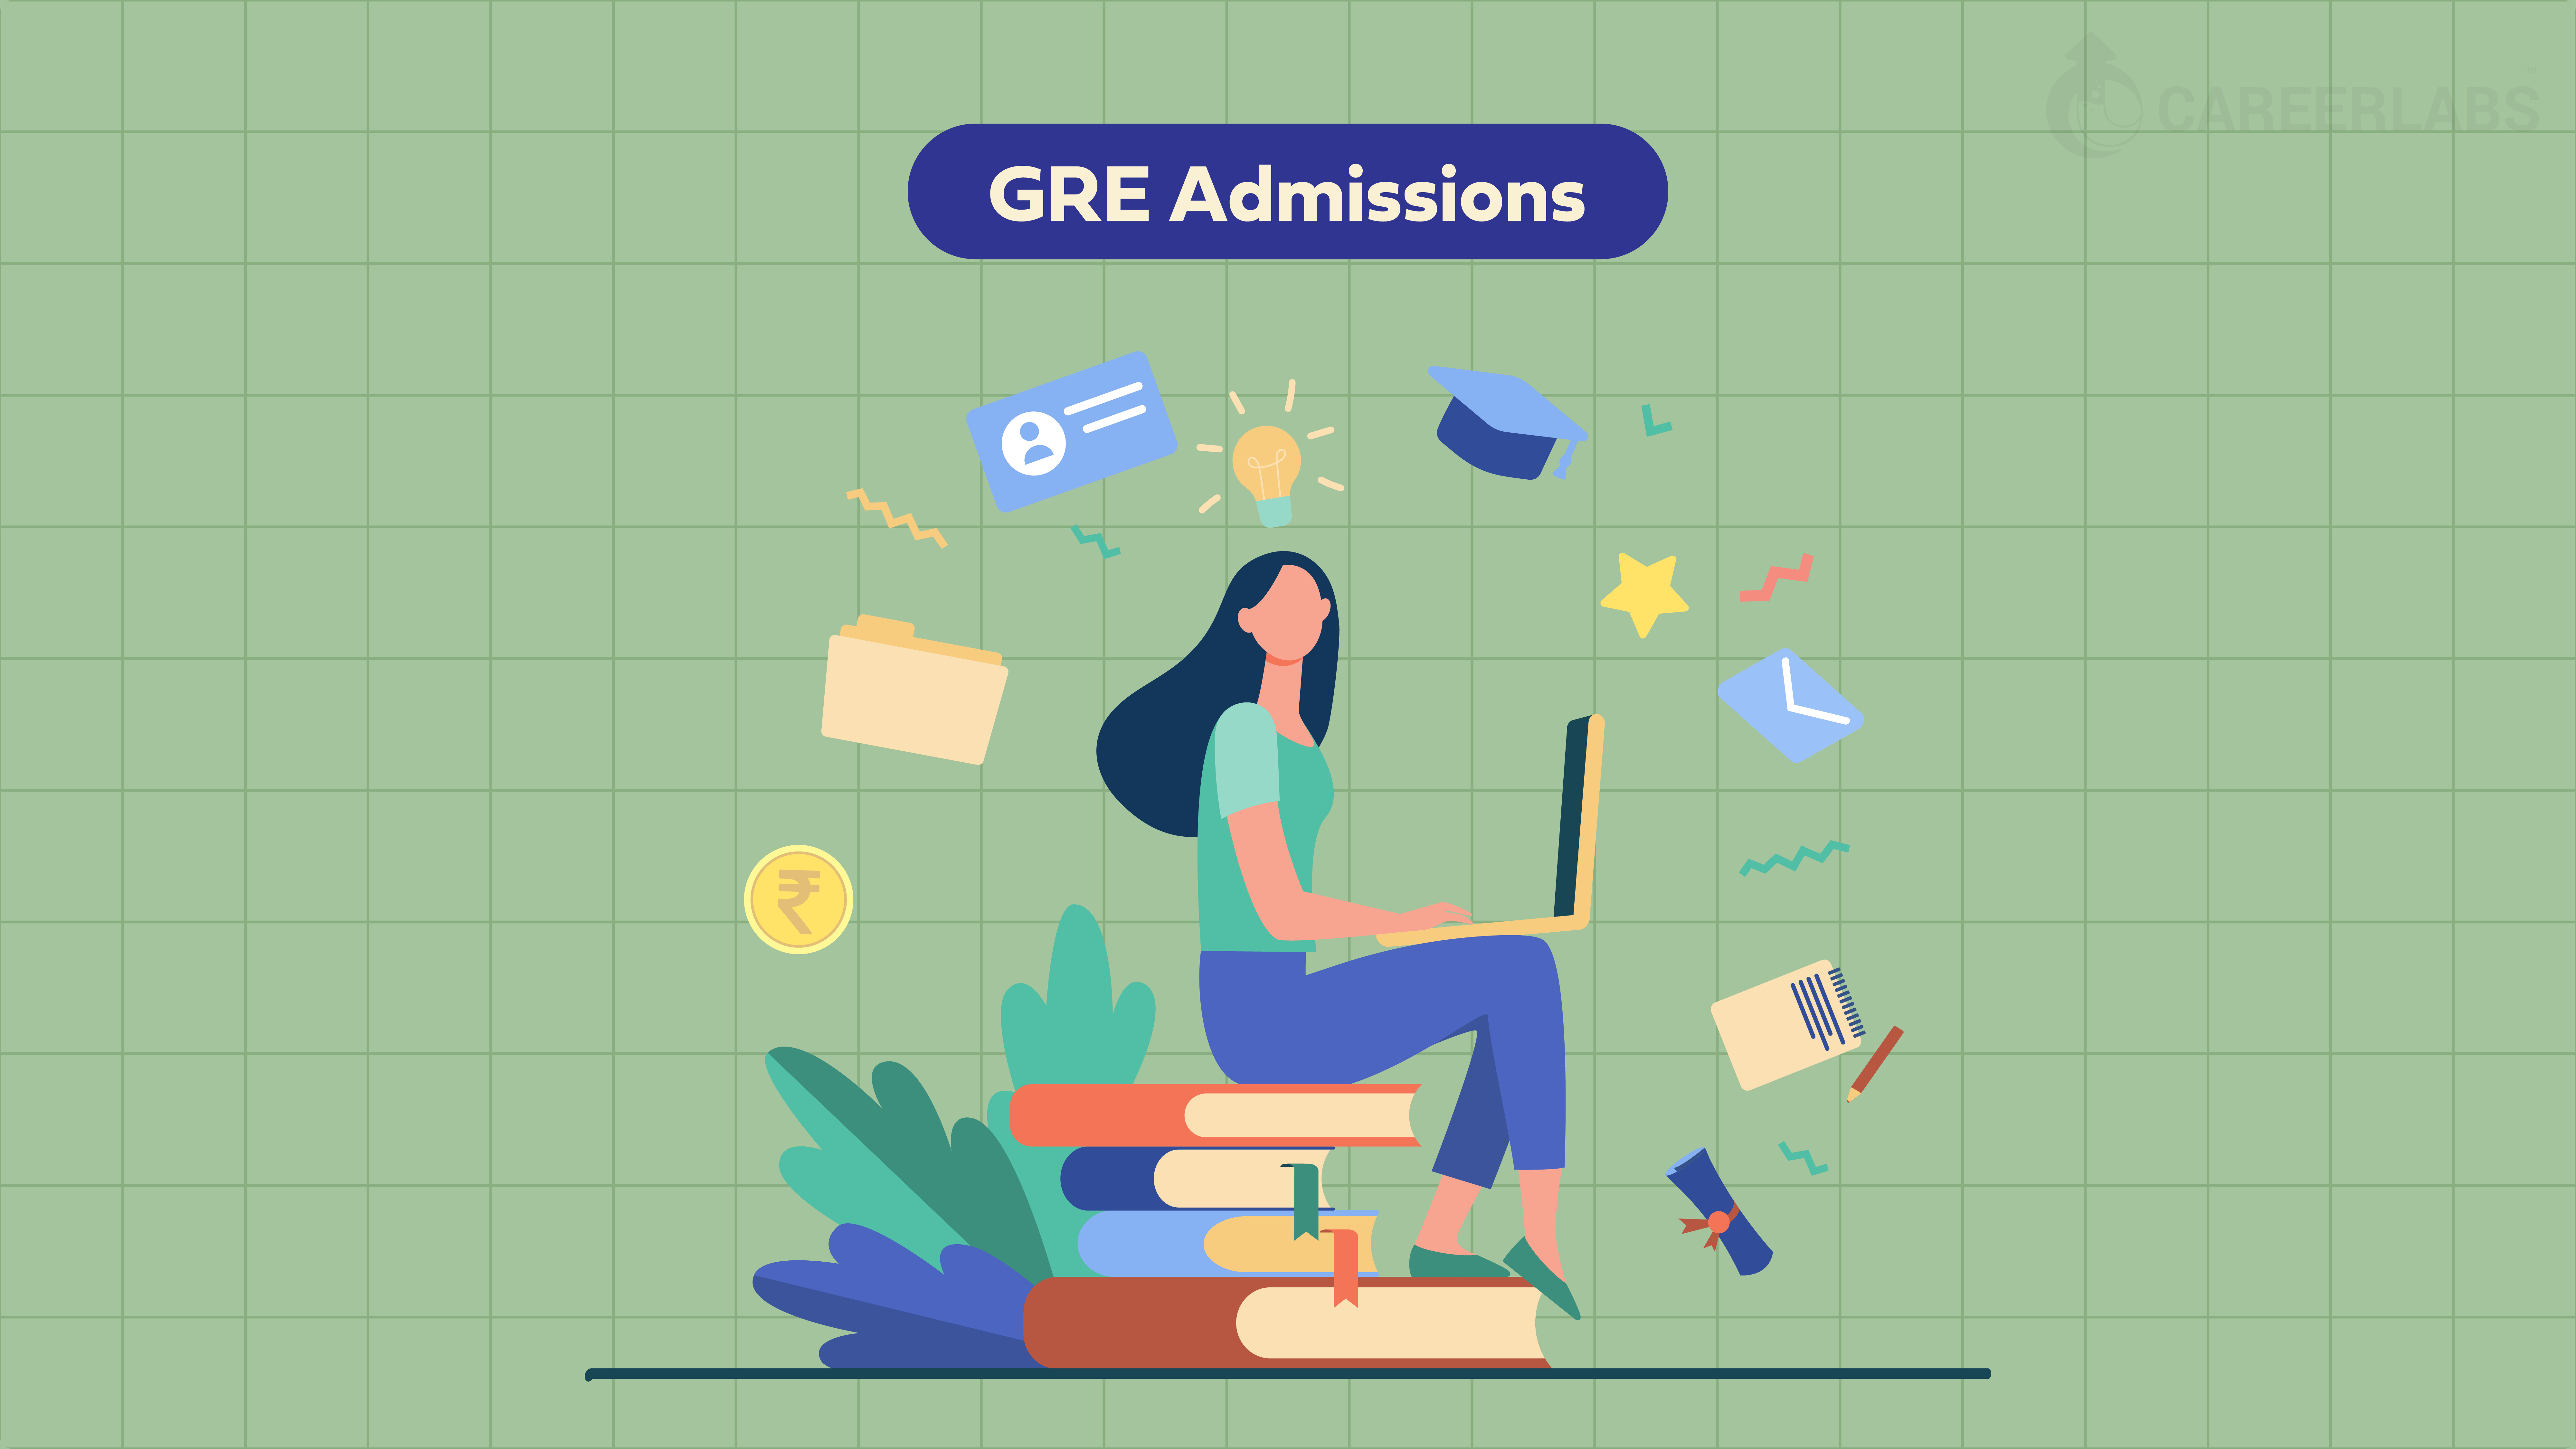 GRE Admissions